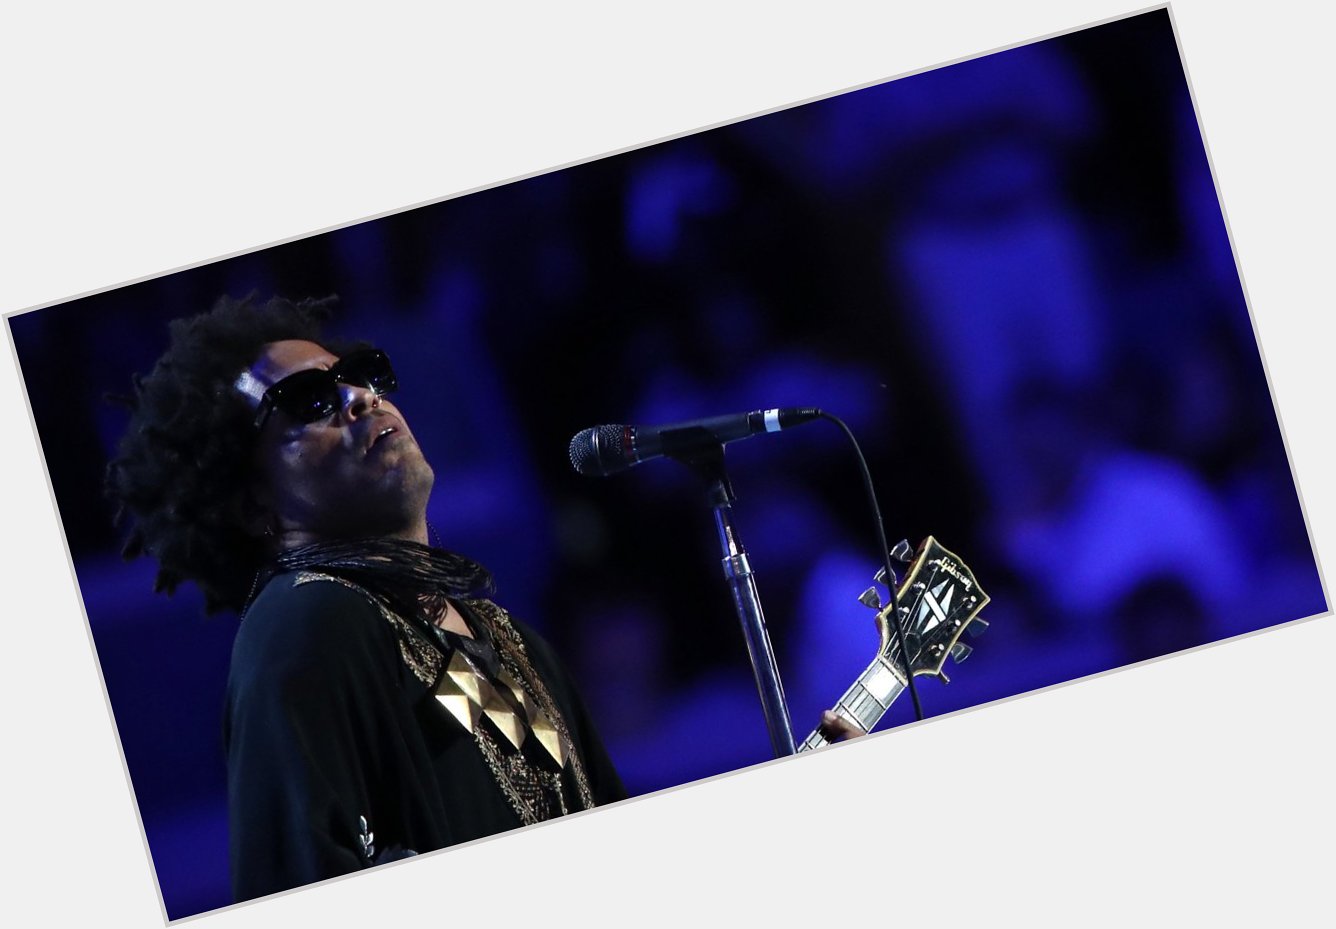 Happy birthday Lenny Kravitz! Check out our recent interview with the enduring rock star  